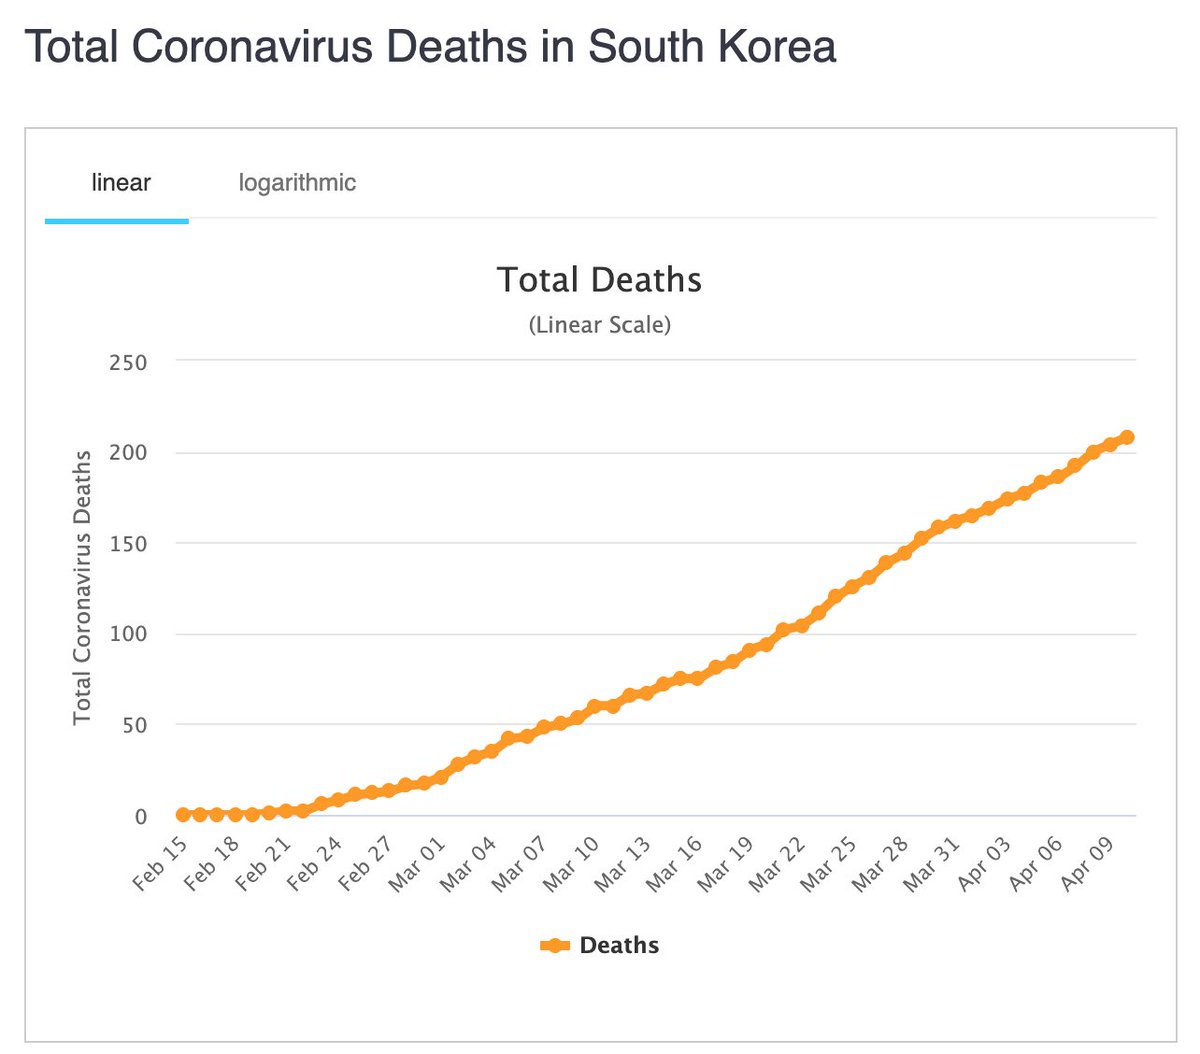 South Korea (50m) vs UK (60m people) covid stats.South Korea: 200 deaths, spread stabilized.UK: 9000 deaths, spread out of control.SK citizens pay taxes and get protected.  https://observers.france24.com/en/20200305-south-korea-coronavirus-COVID-19-kits-masks https://www.channelnewsasia.com/news/asia/south-korea-doubles-rescue-package-to-us-80-billion-amid-covid-12570294UK PM is an infection vector  https://www.mirror.co.uk/news/uk-news/boris-johnsons-dramatic-coronavirus-decline-21825711